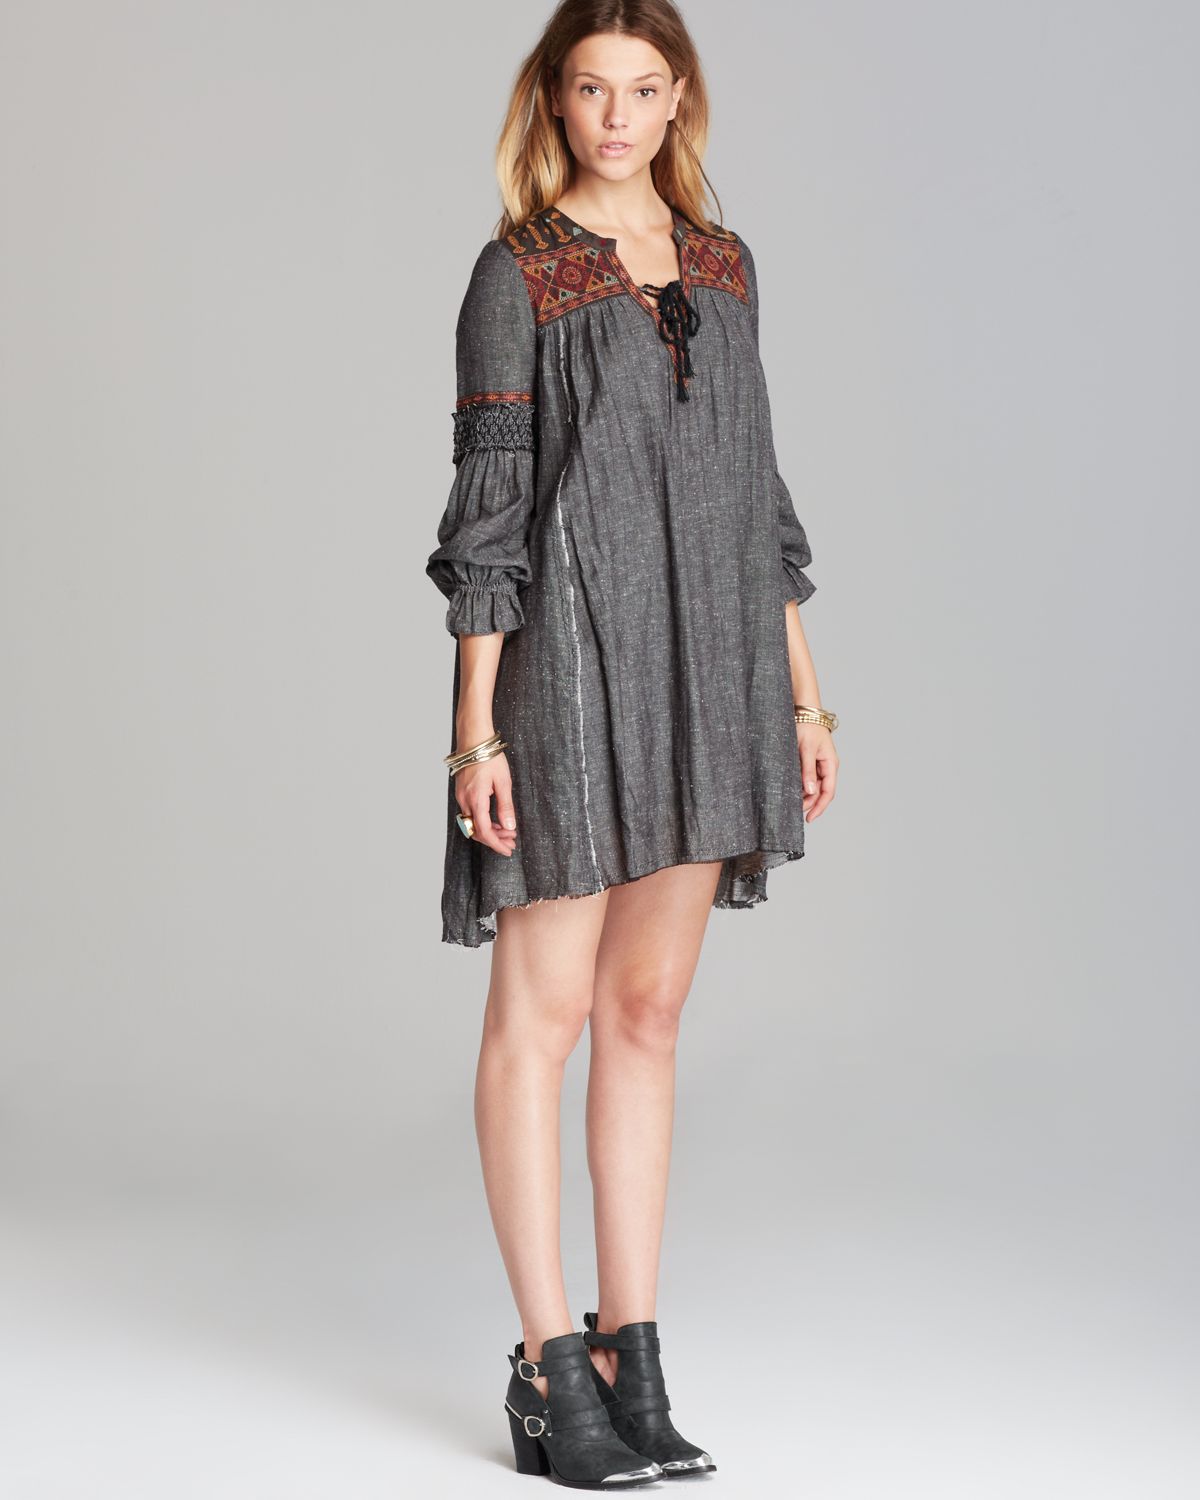 Swan Lace Mini Dress at Free People Clothing Boutique